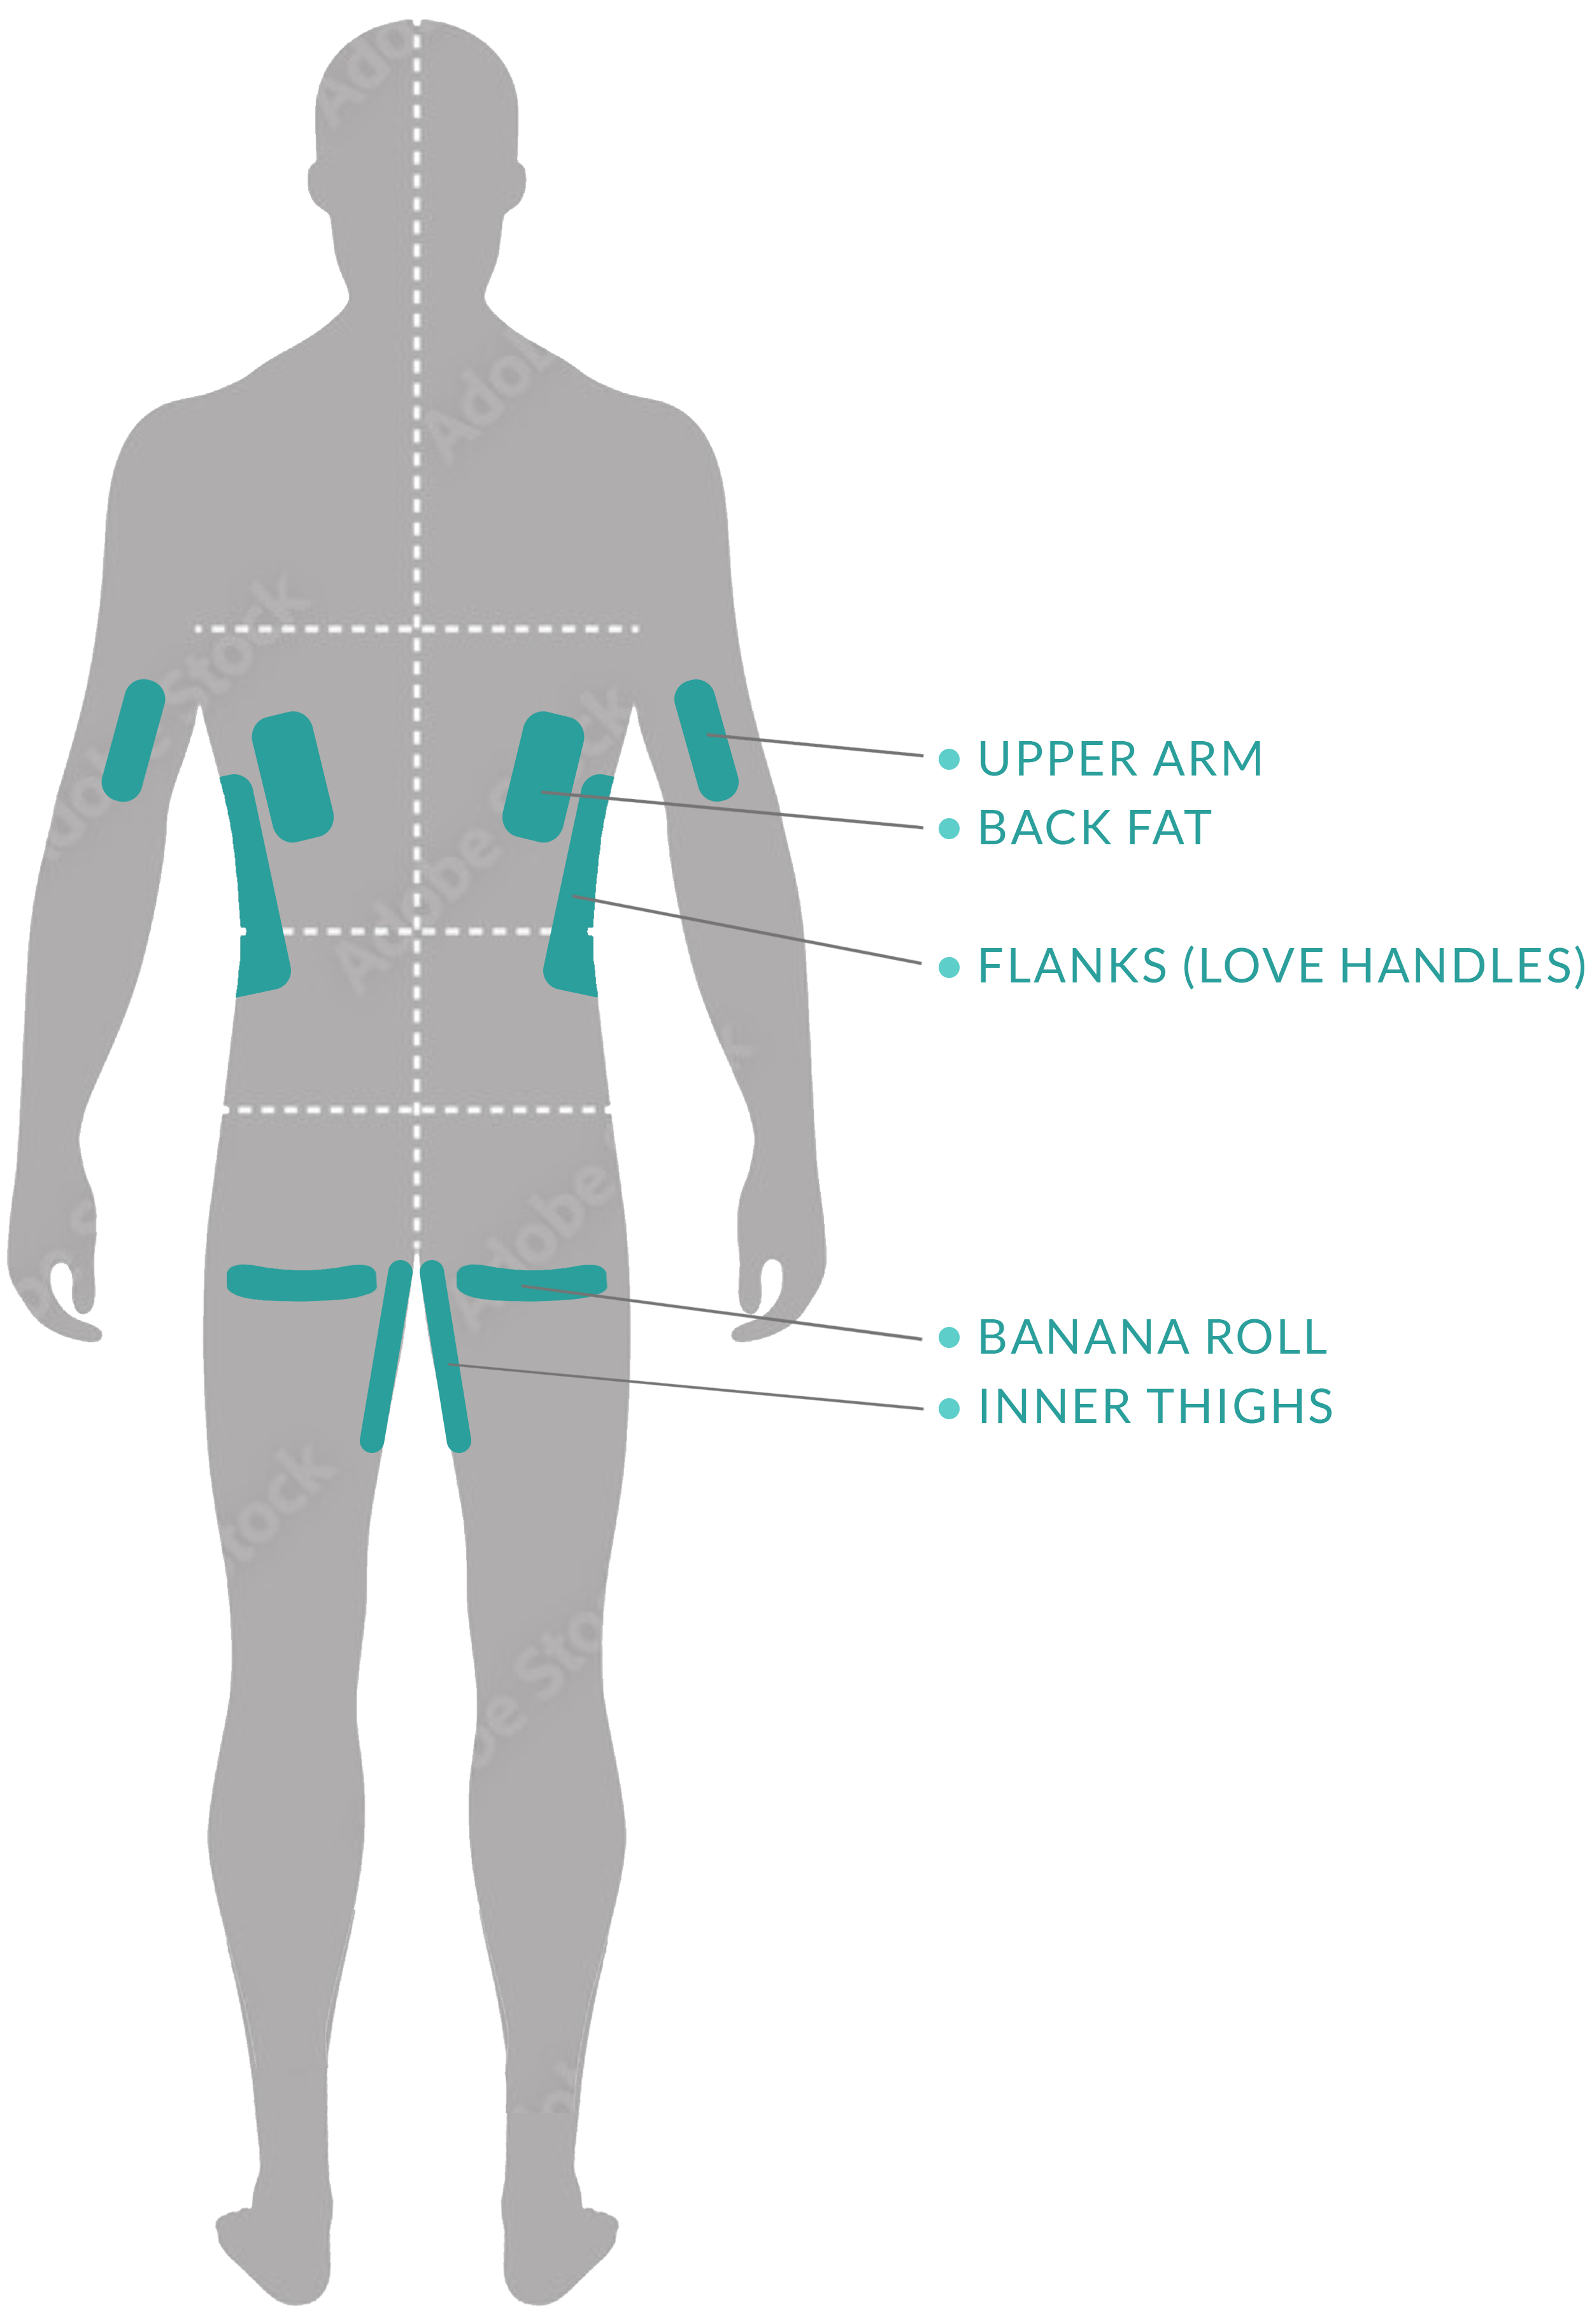 Diagram of male back showing body zones targeted by CoolSculpting: Upper Arms, Back Fat, Flank (Love Handles), Banana Roll, and Inner Thighs